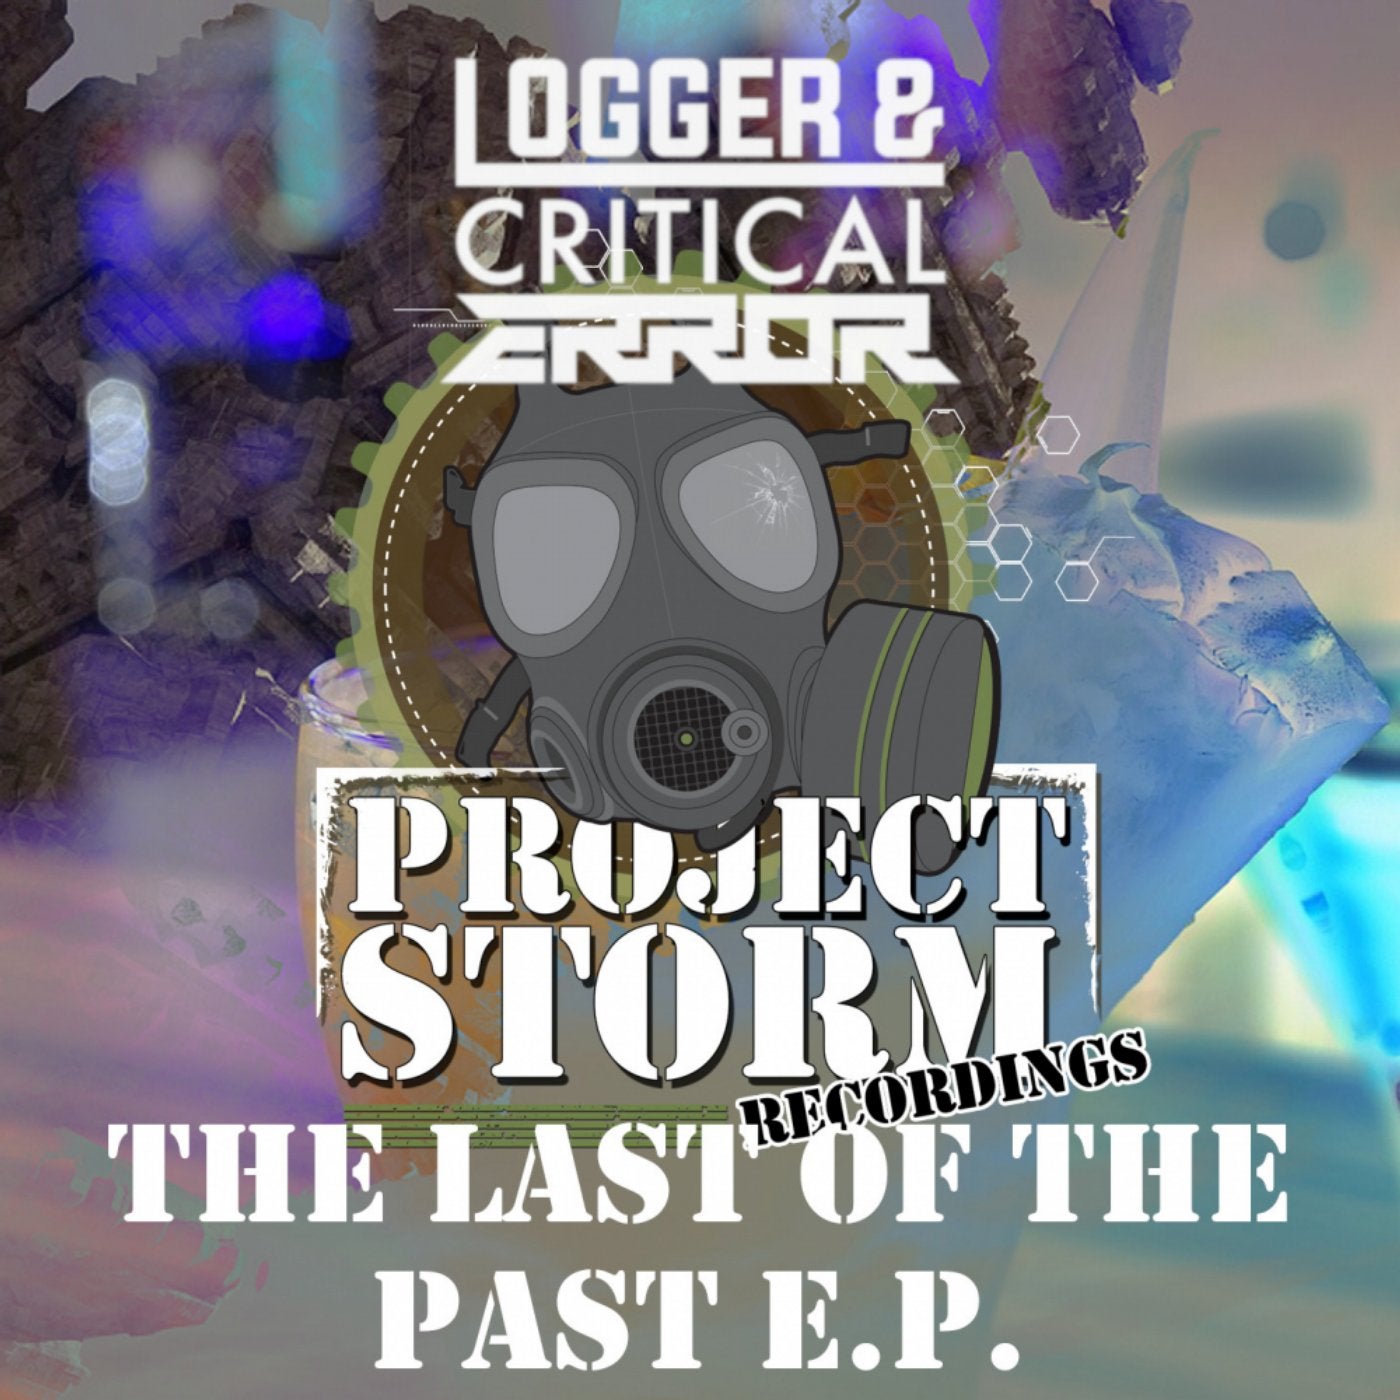 The Last of The Past EP